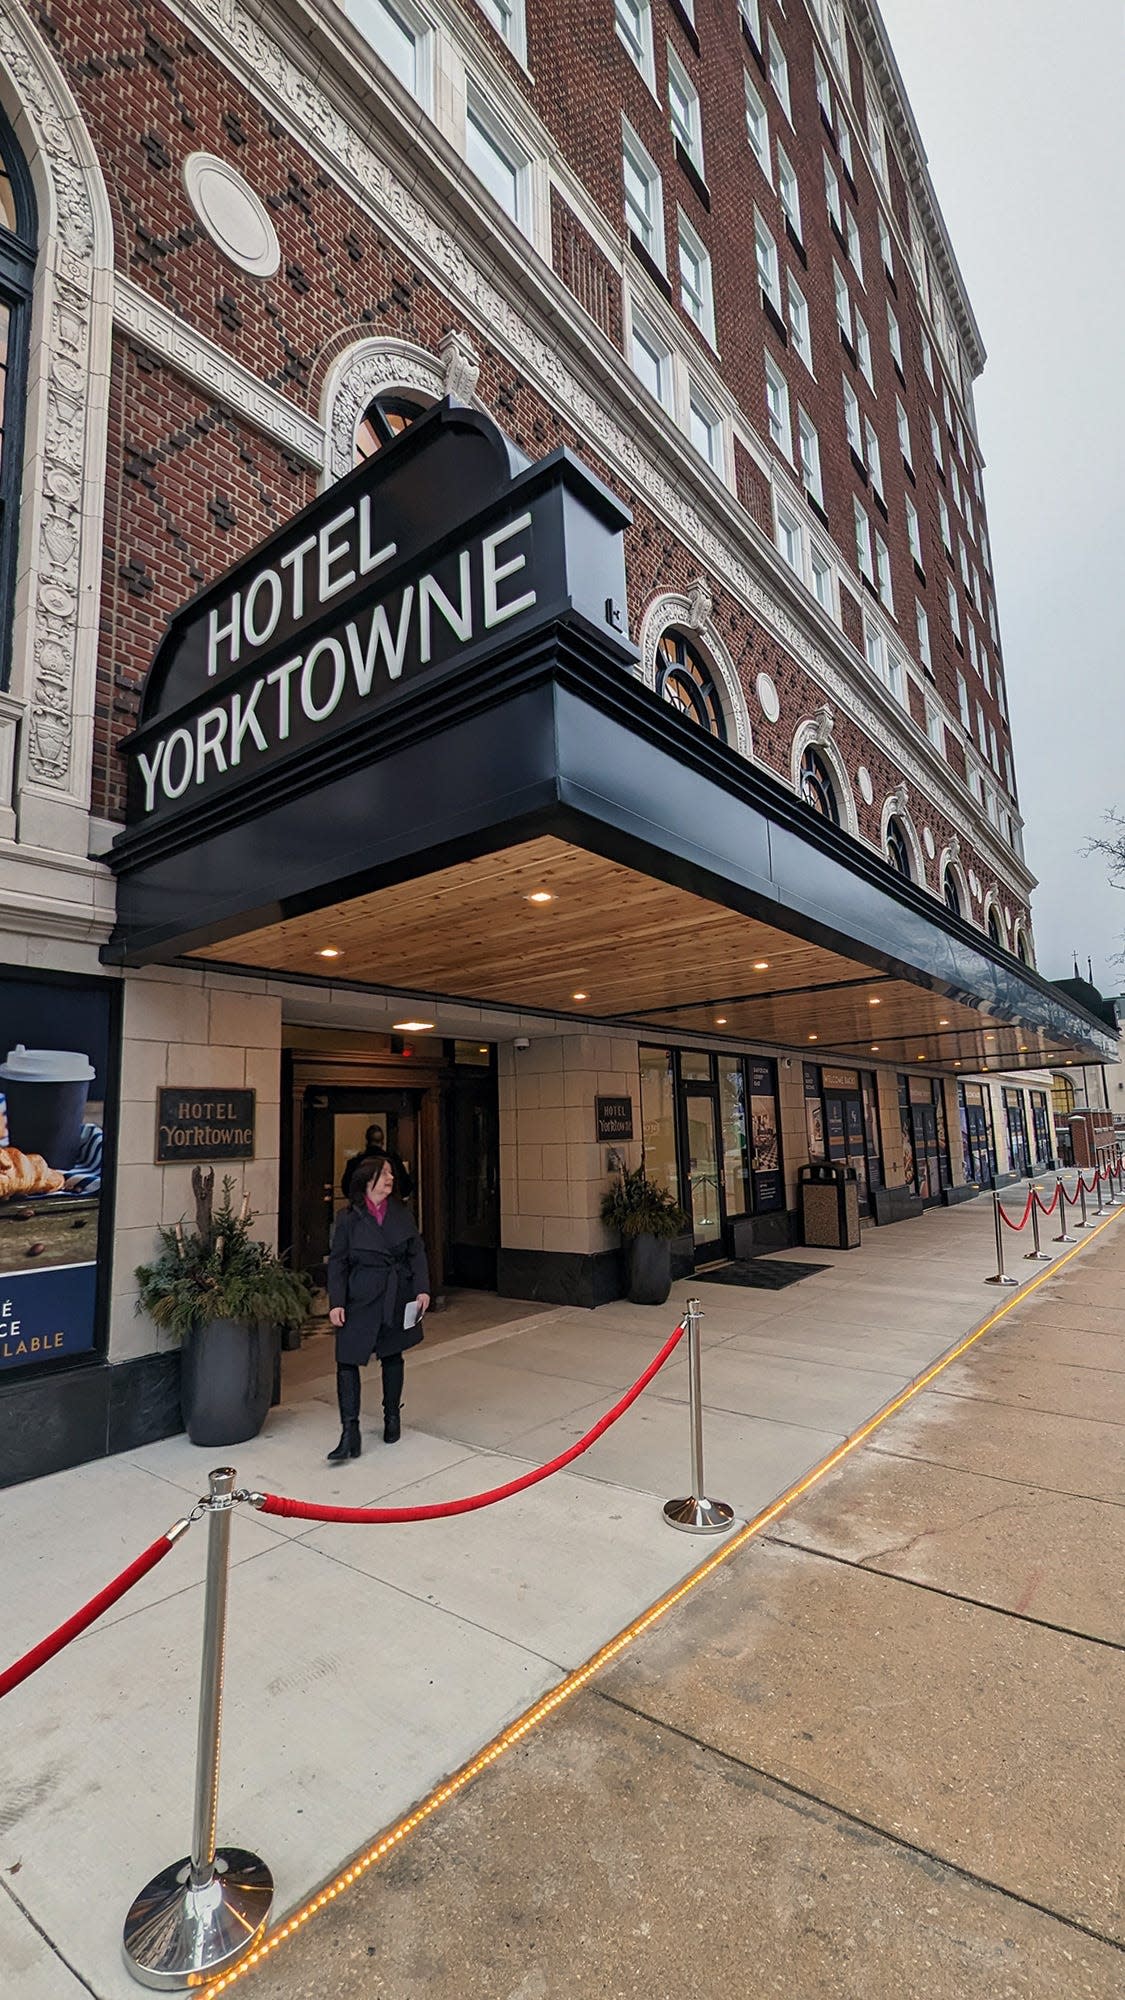 The velvet ropes lead visitors to the old main entrance of the Yorktowne Hotel opening.